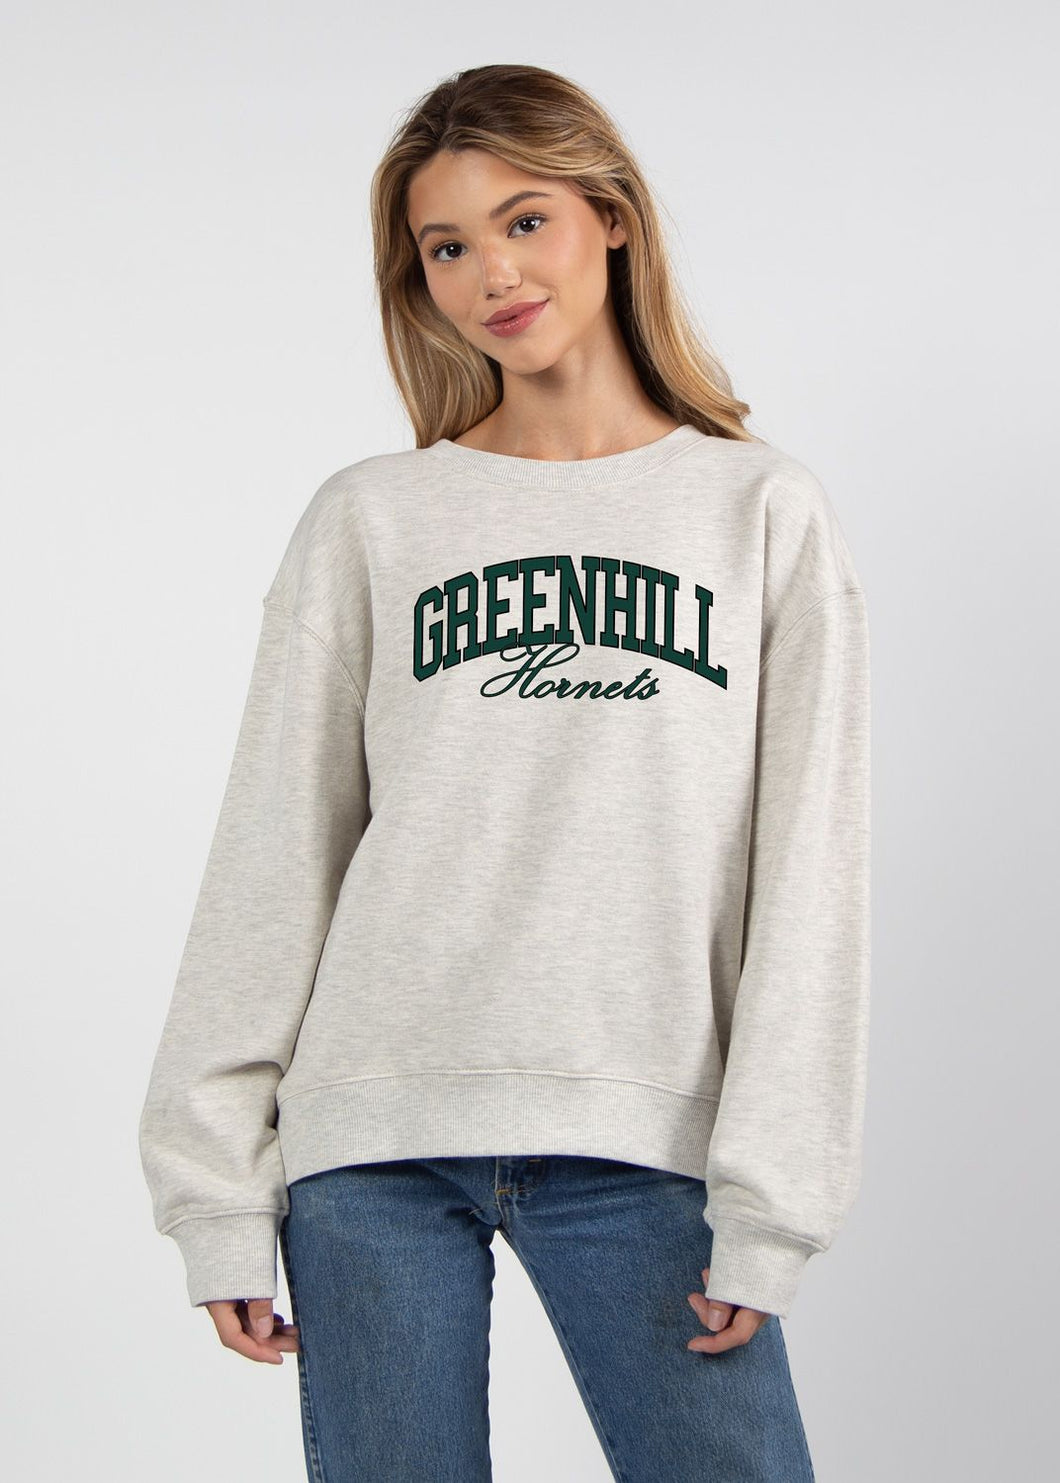 Greenhill Chicka-D Womens Vintage Arc Old School Crew